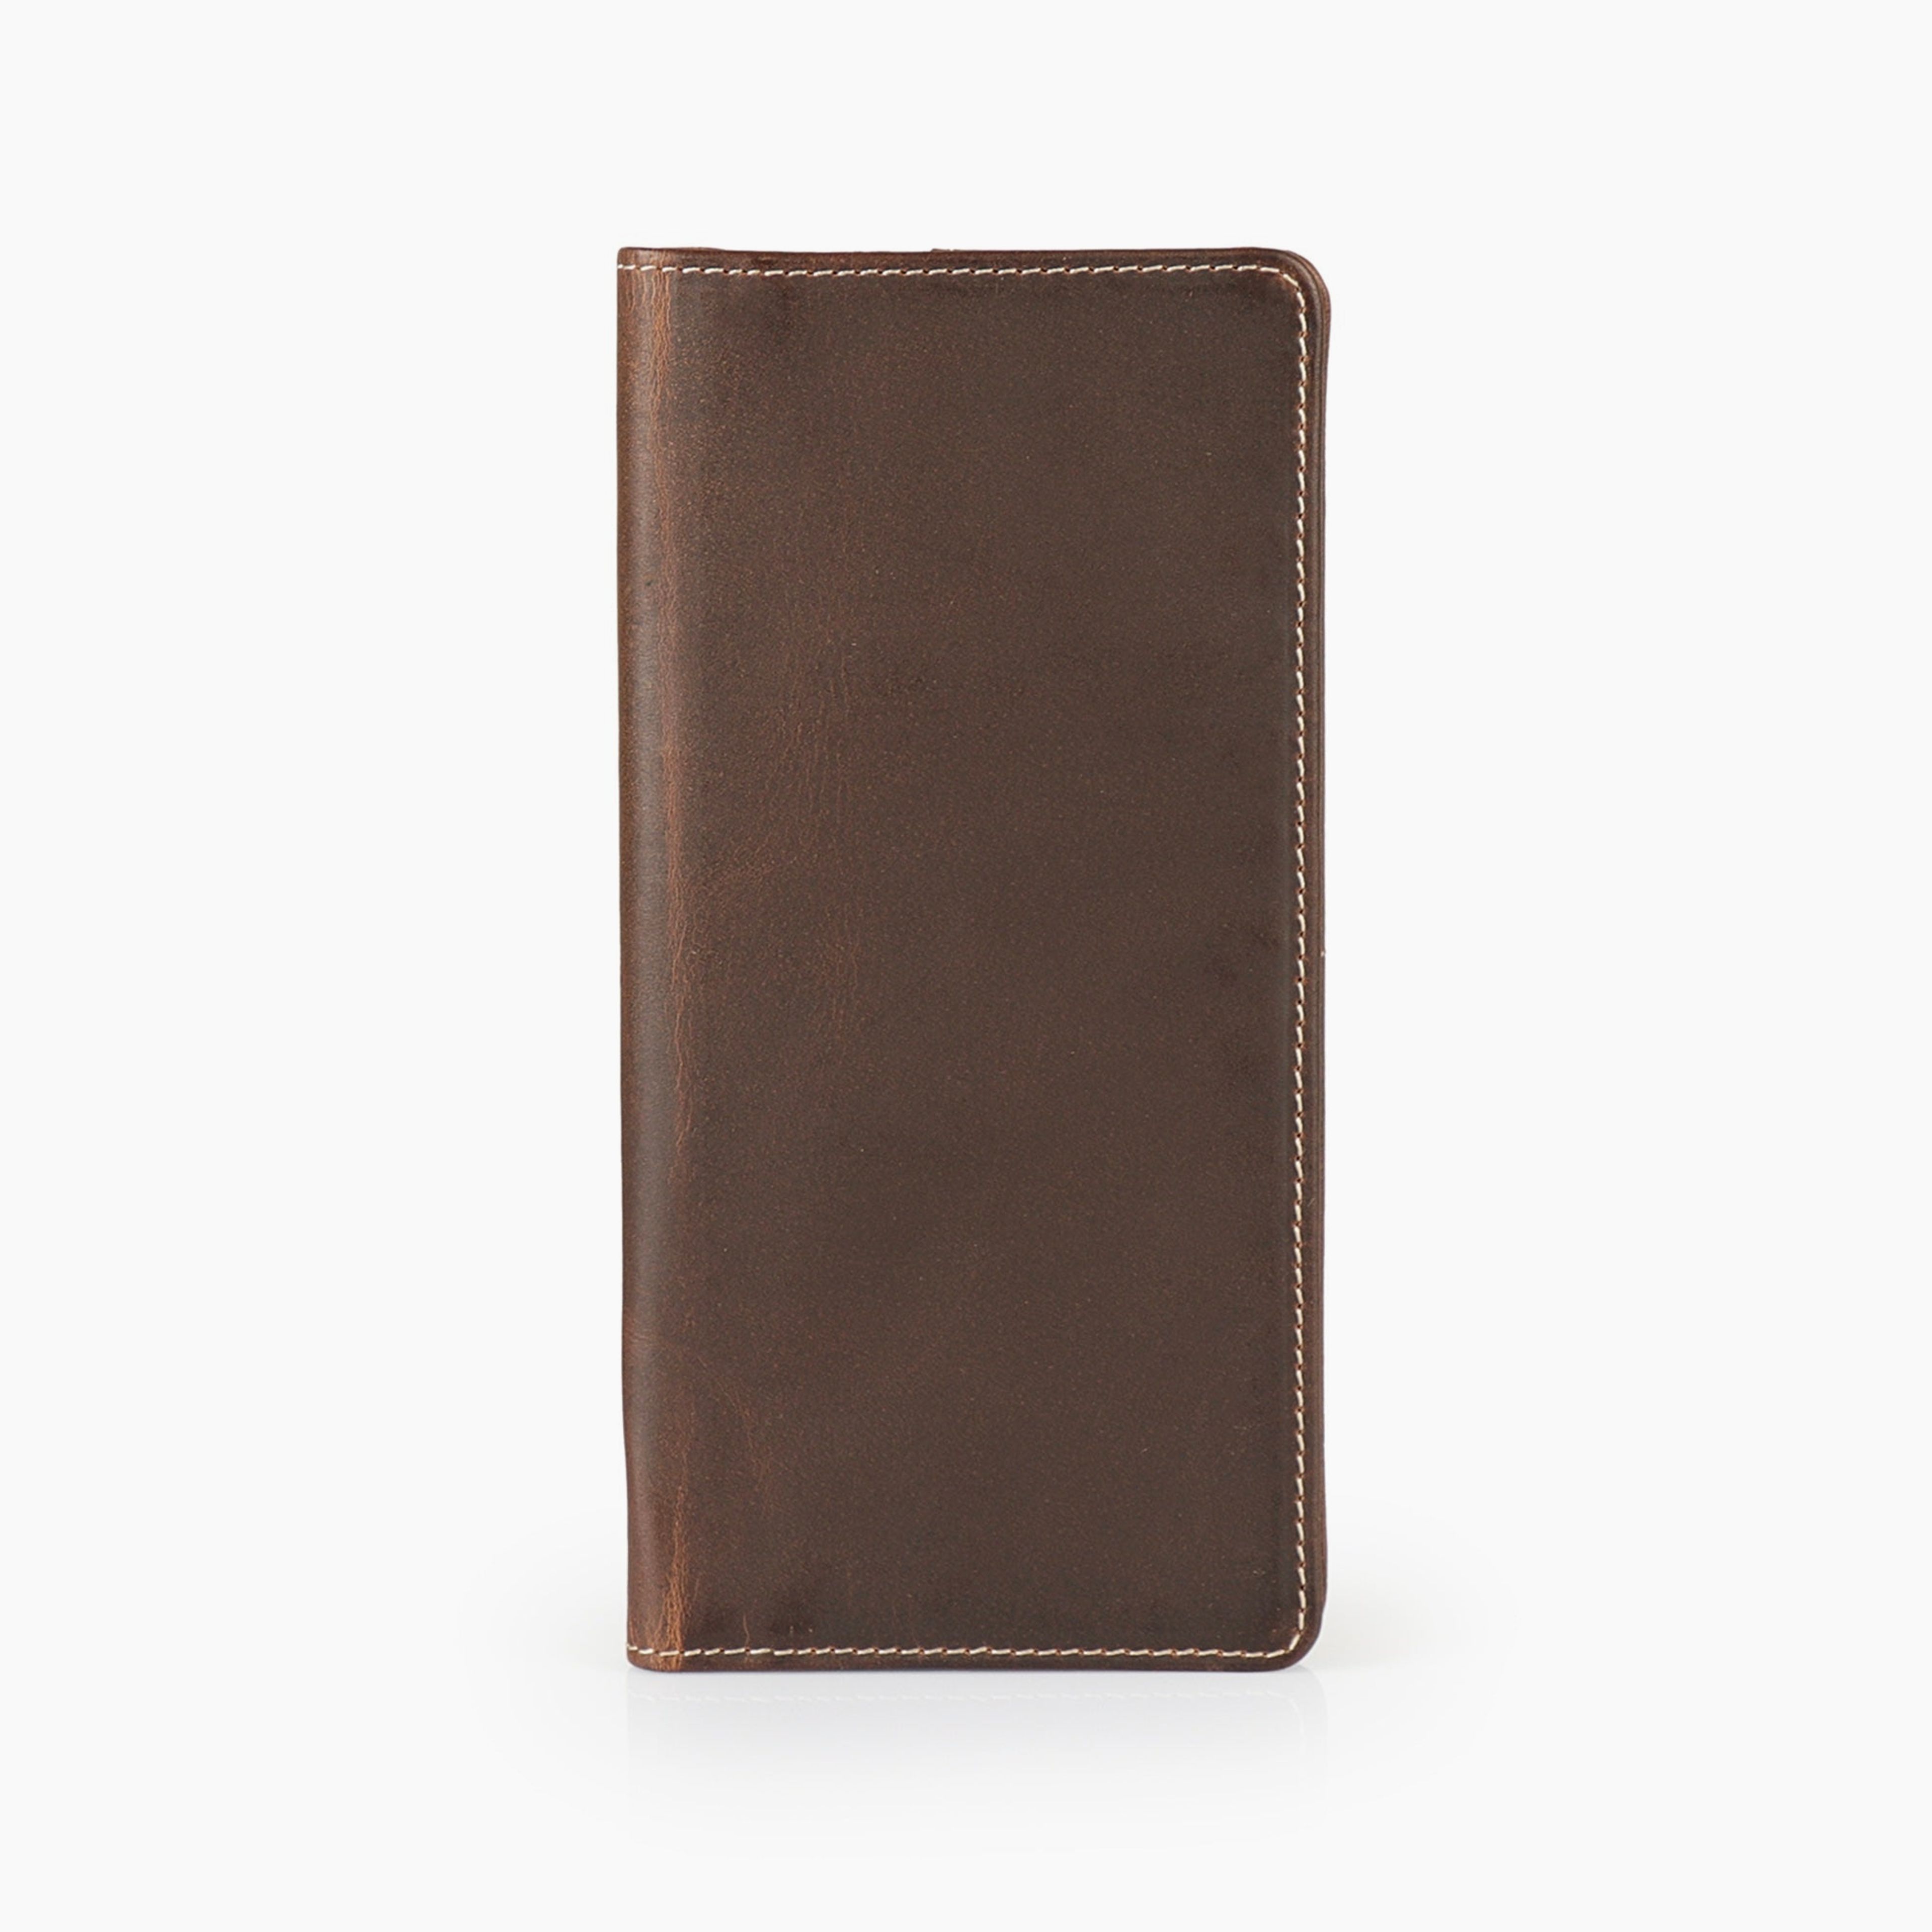 Almost Perfect | Peel Leather Wallet